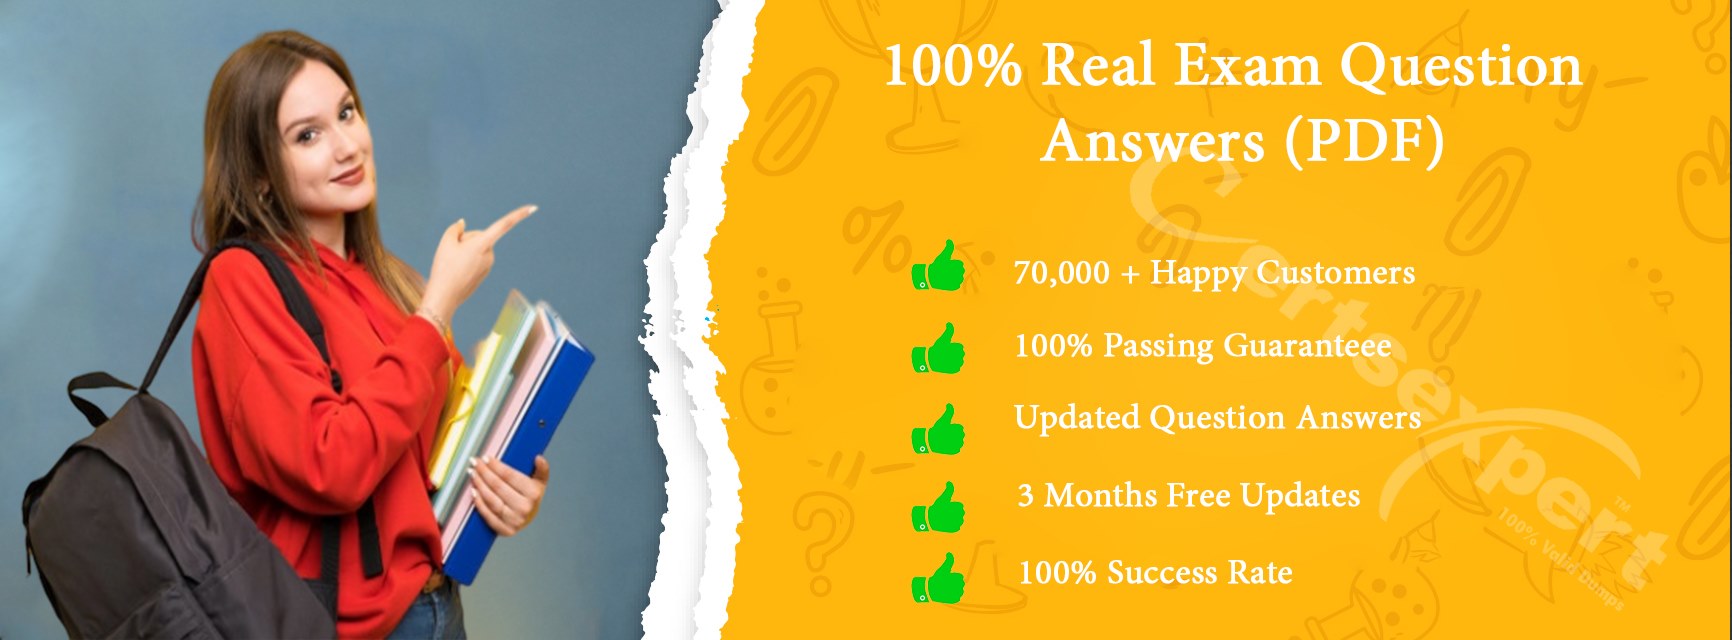 How to Pass the AD0-E710 Exam With Ease & Success?